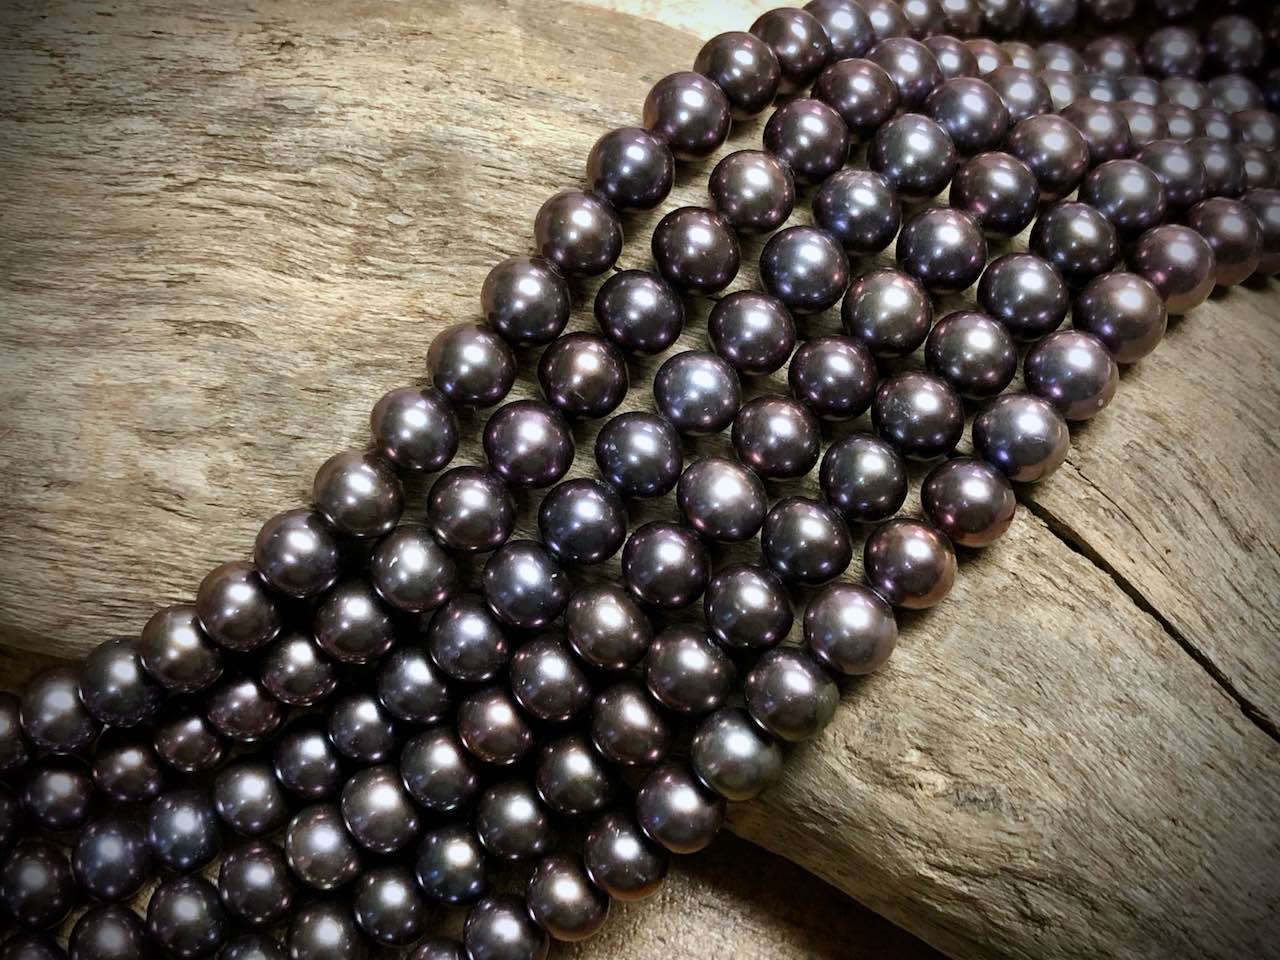 Old-Stock, Vintage Freshwater Pearls - 7mm - 16”